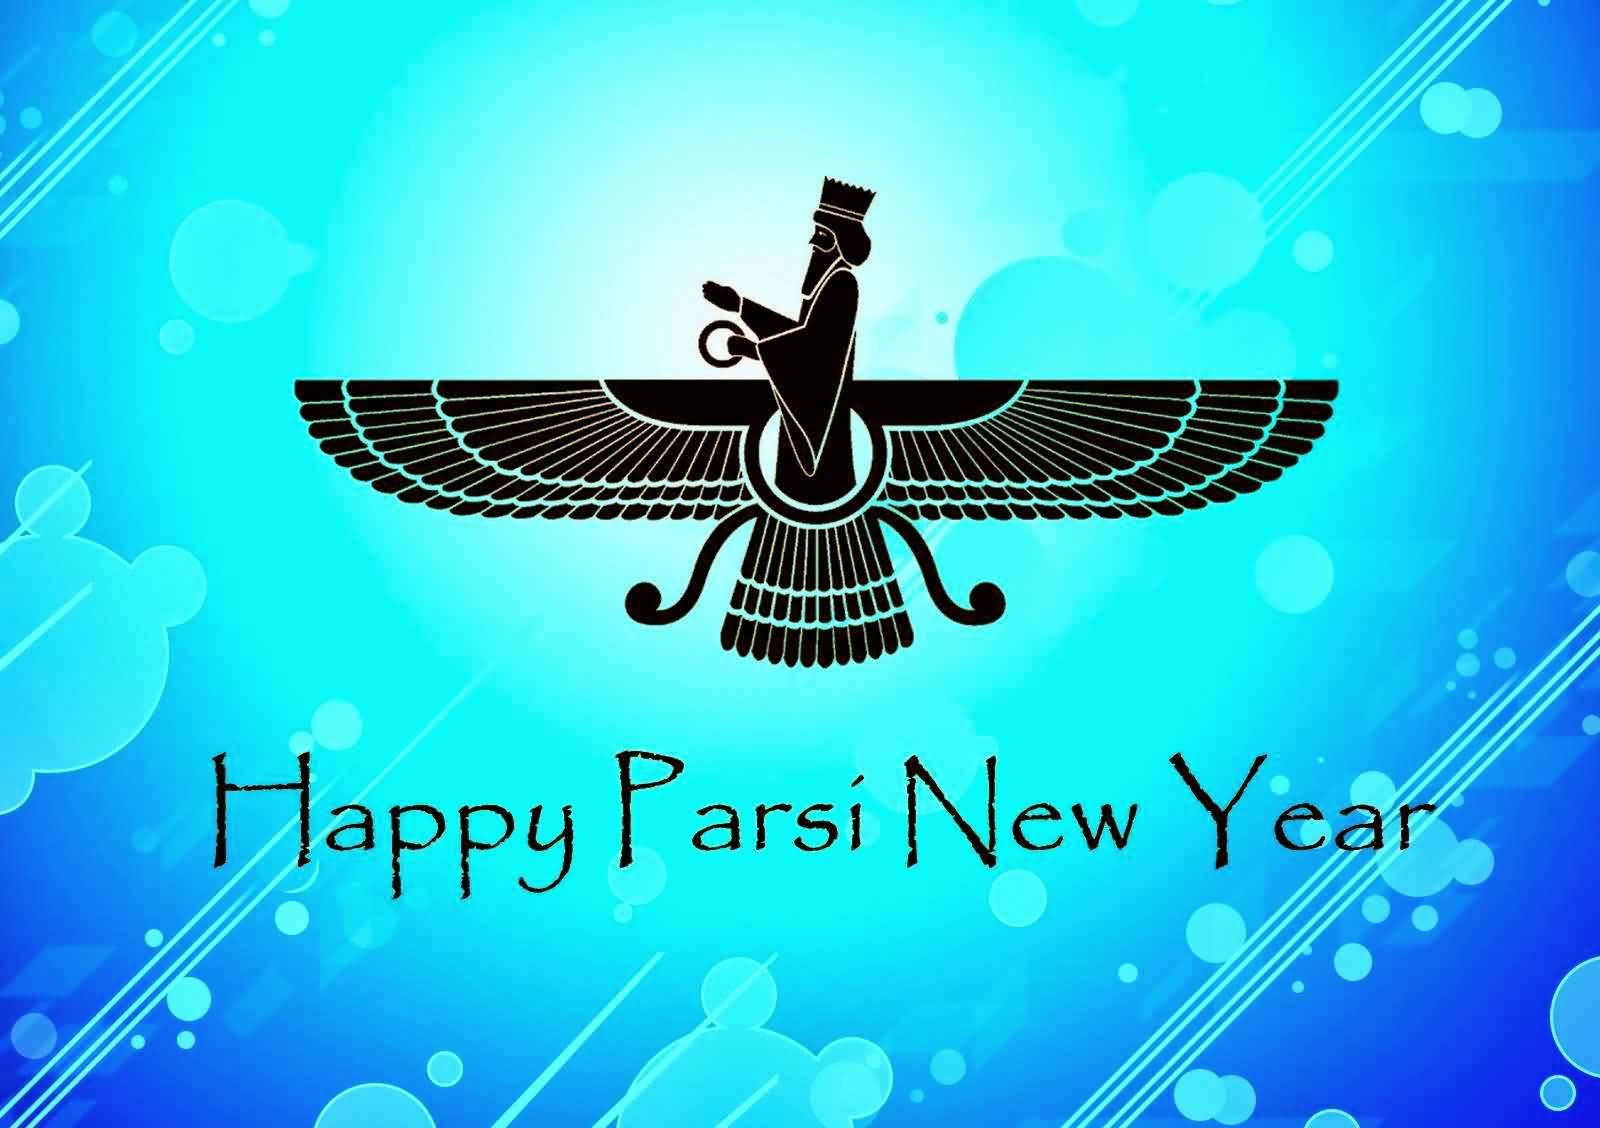 Happy Parsi New Year Wishes Wallpaper